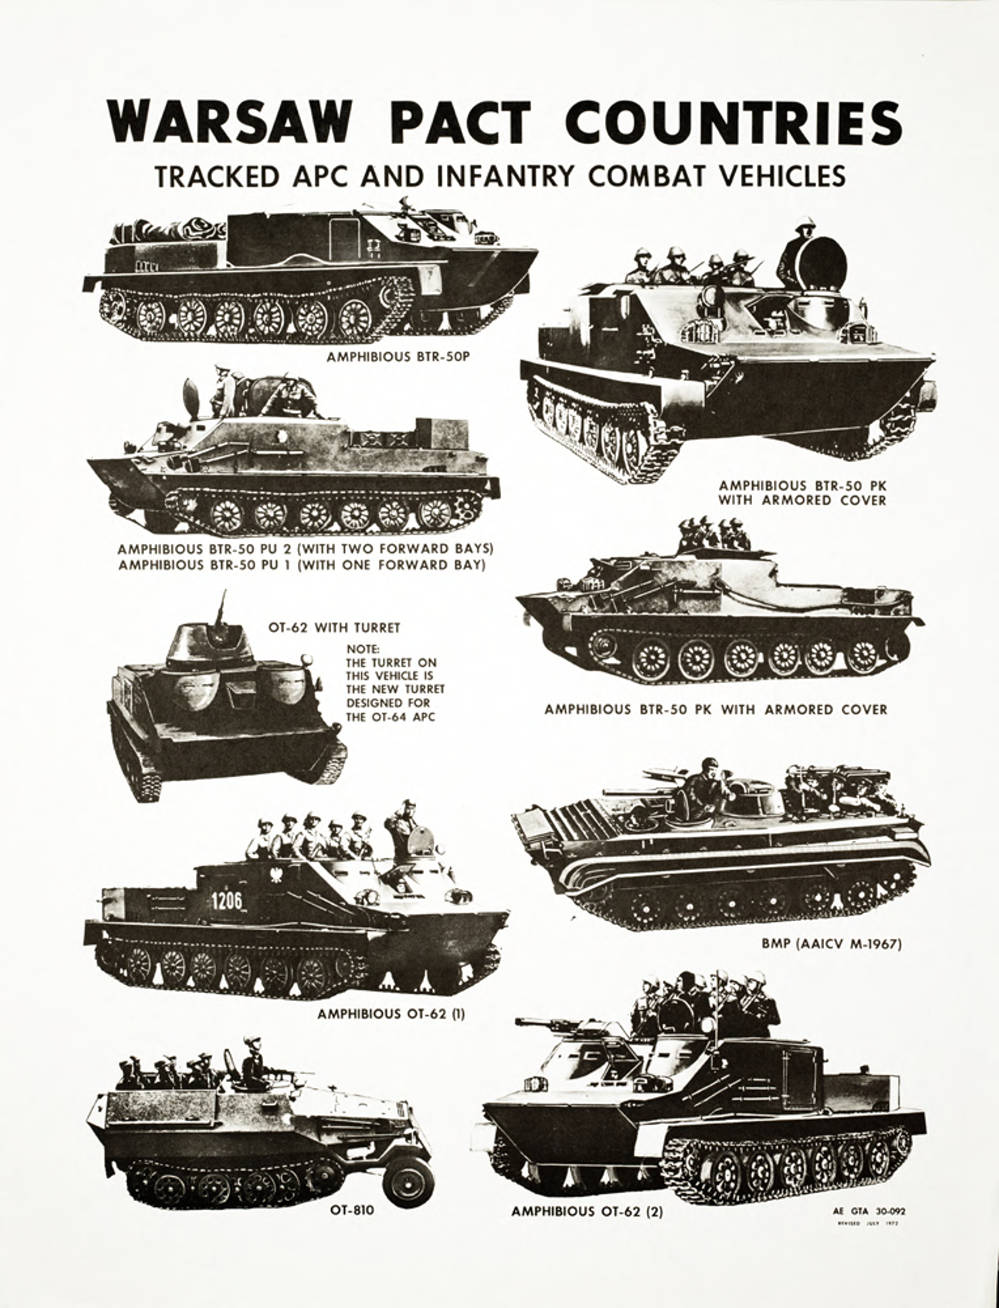 Military Poster Print Warsaw Pact Countries Pritzker Military Museum And Library Chicago